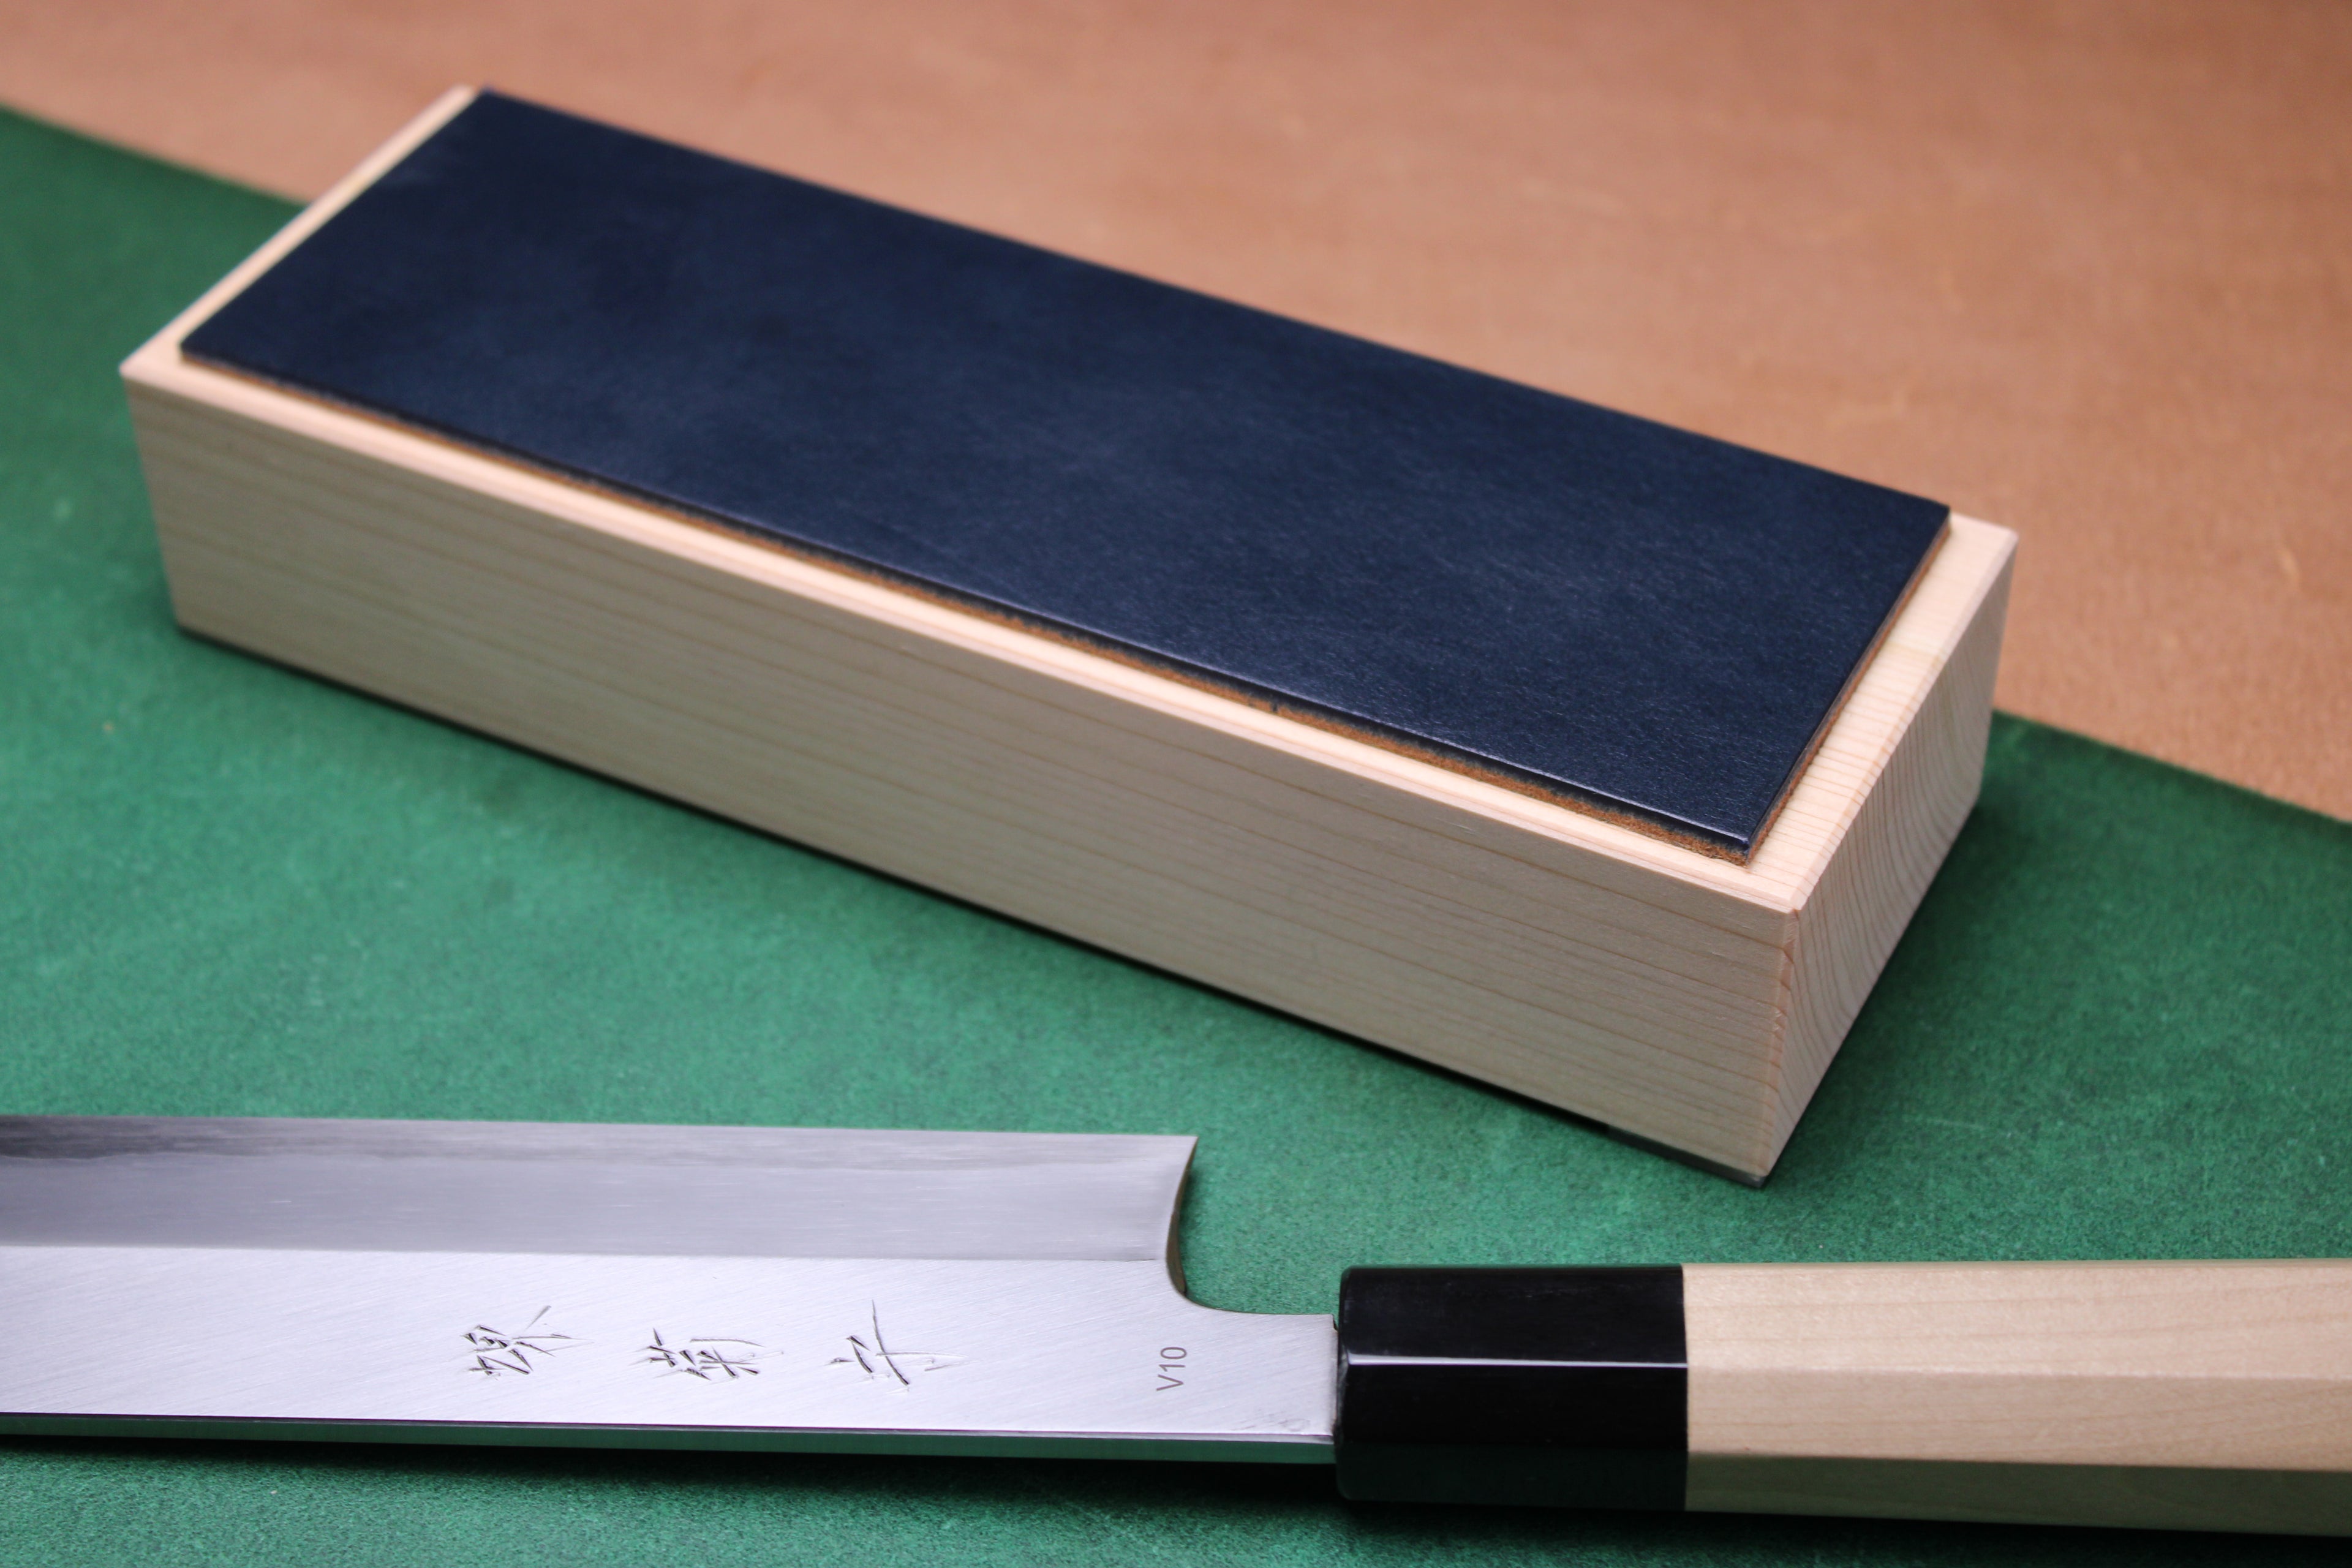 knife strop made of English bridle leather colored midnight blue attached to sturdy tall smooth hinoki wood base sakai kikumori japanese usuba vegetable knife foreground with background faded green and brown 